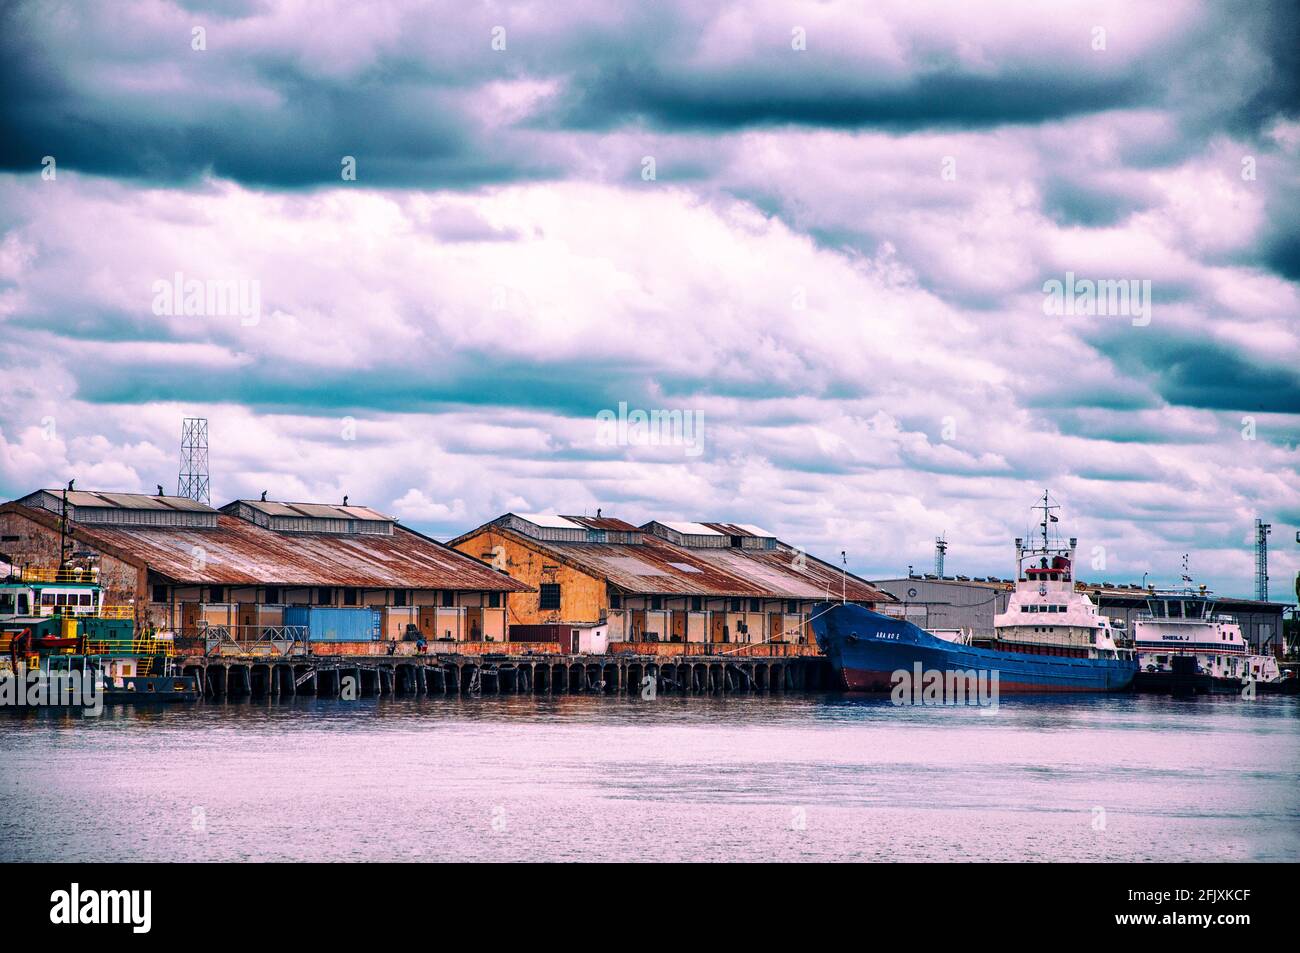 Port of Asuncion, Paraguay, on a cloudy day. Stock Photo